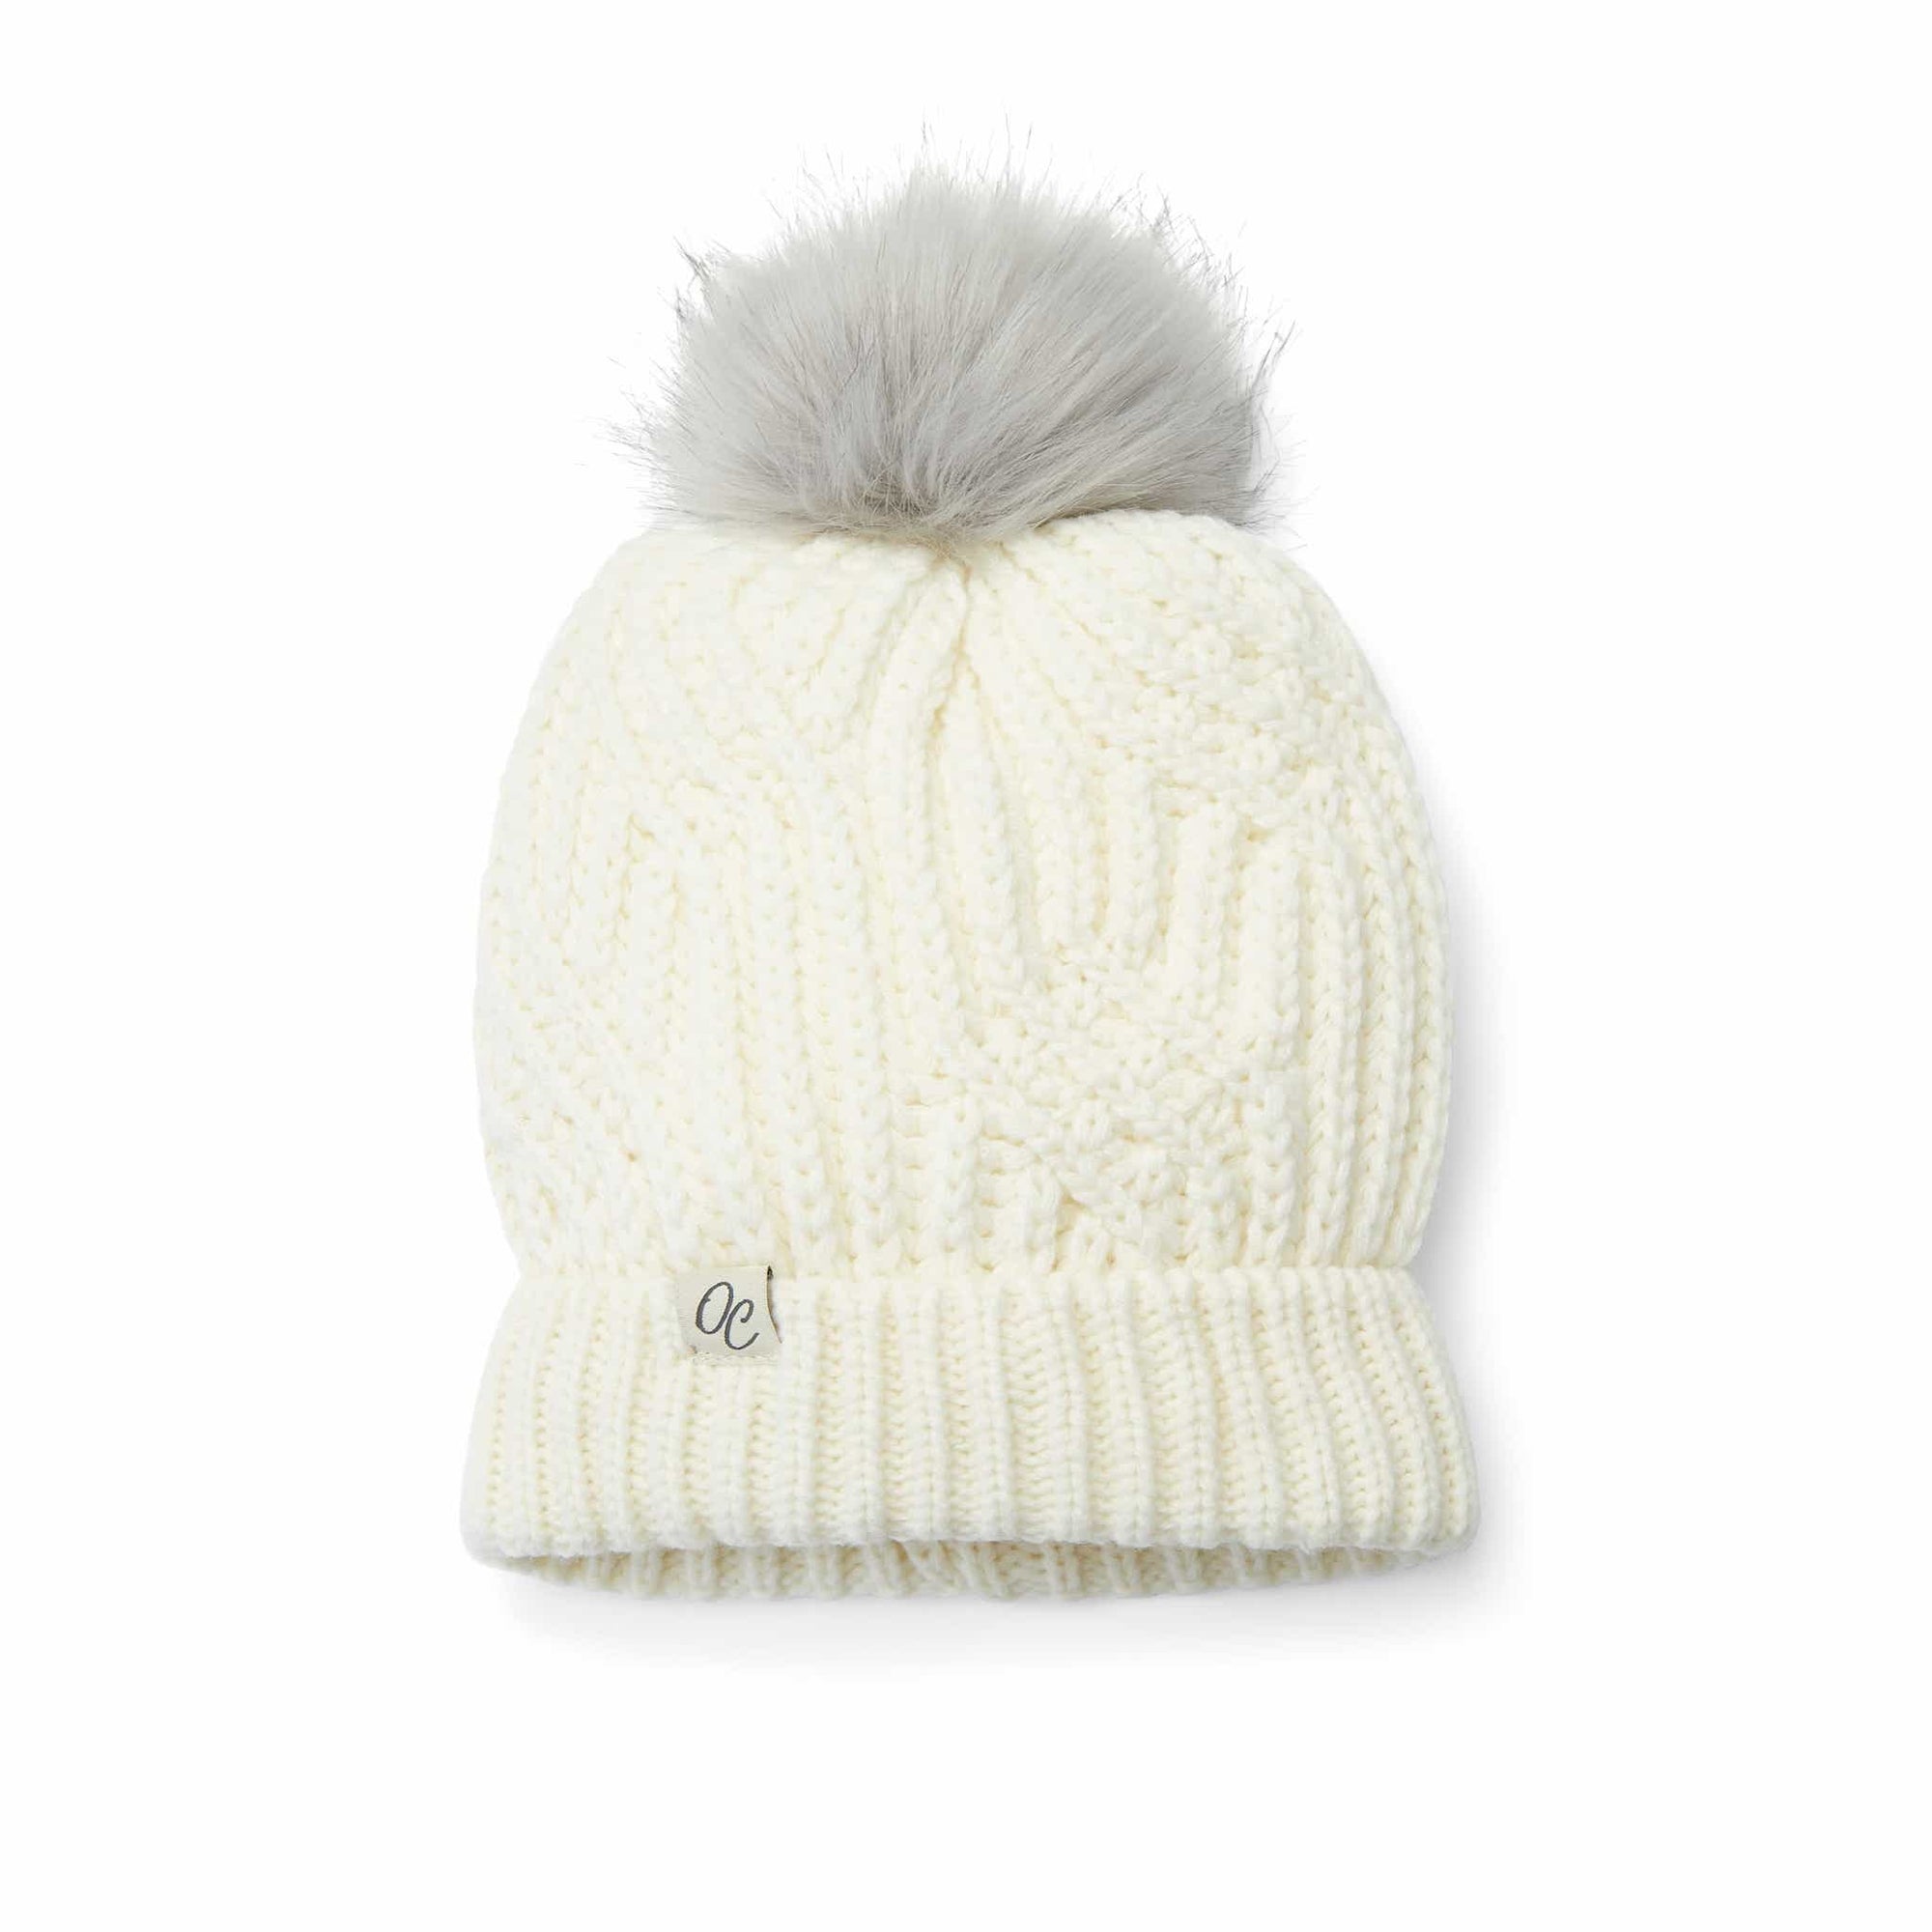 Only Curls Satin Lined Knitted Beanie Hat - Cream with Pom Pom - Only Curls